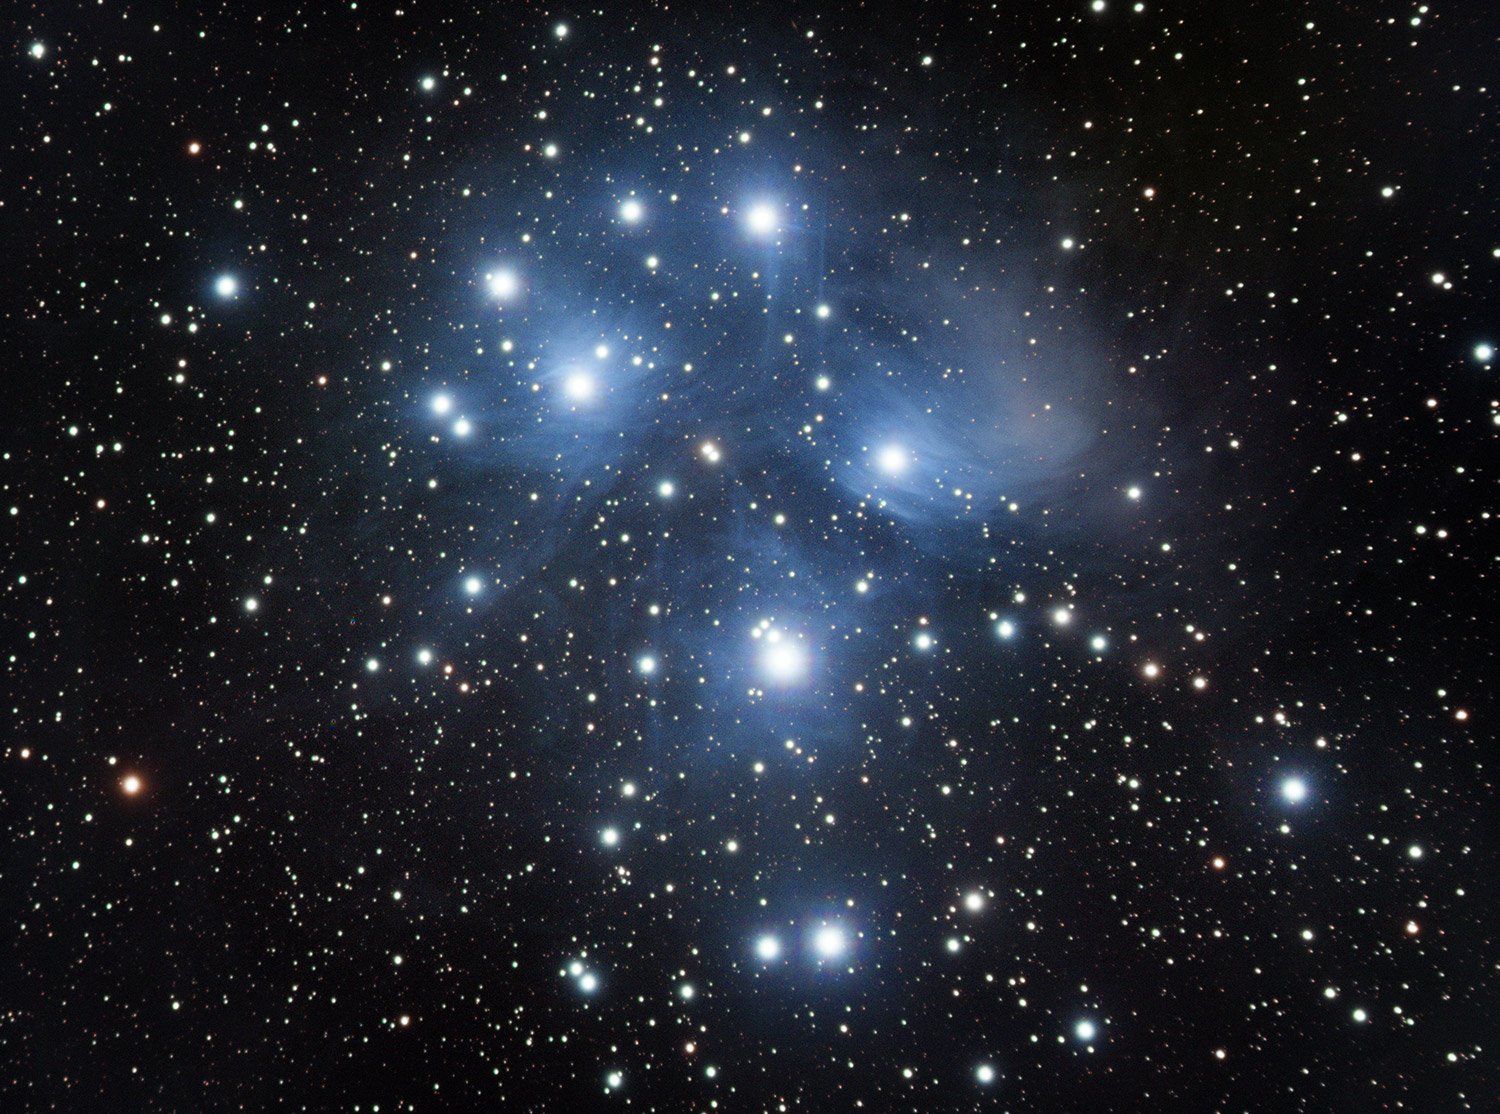 Messier 45 (Pleiades Cluster, The Seven Sisters)